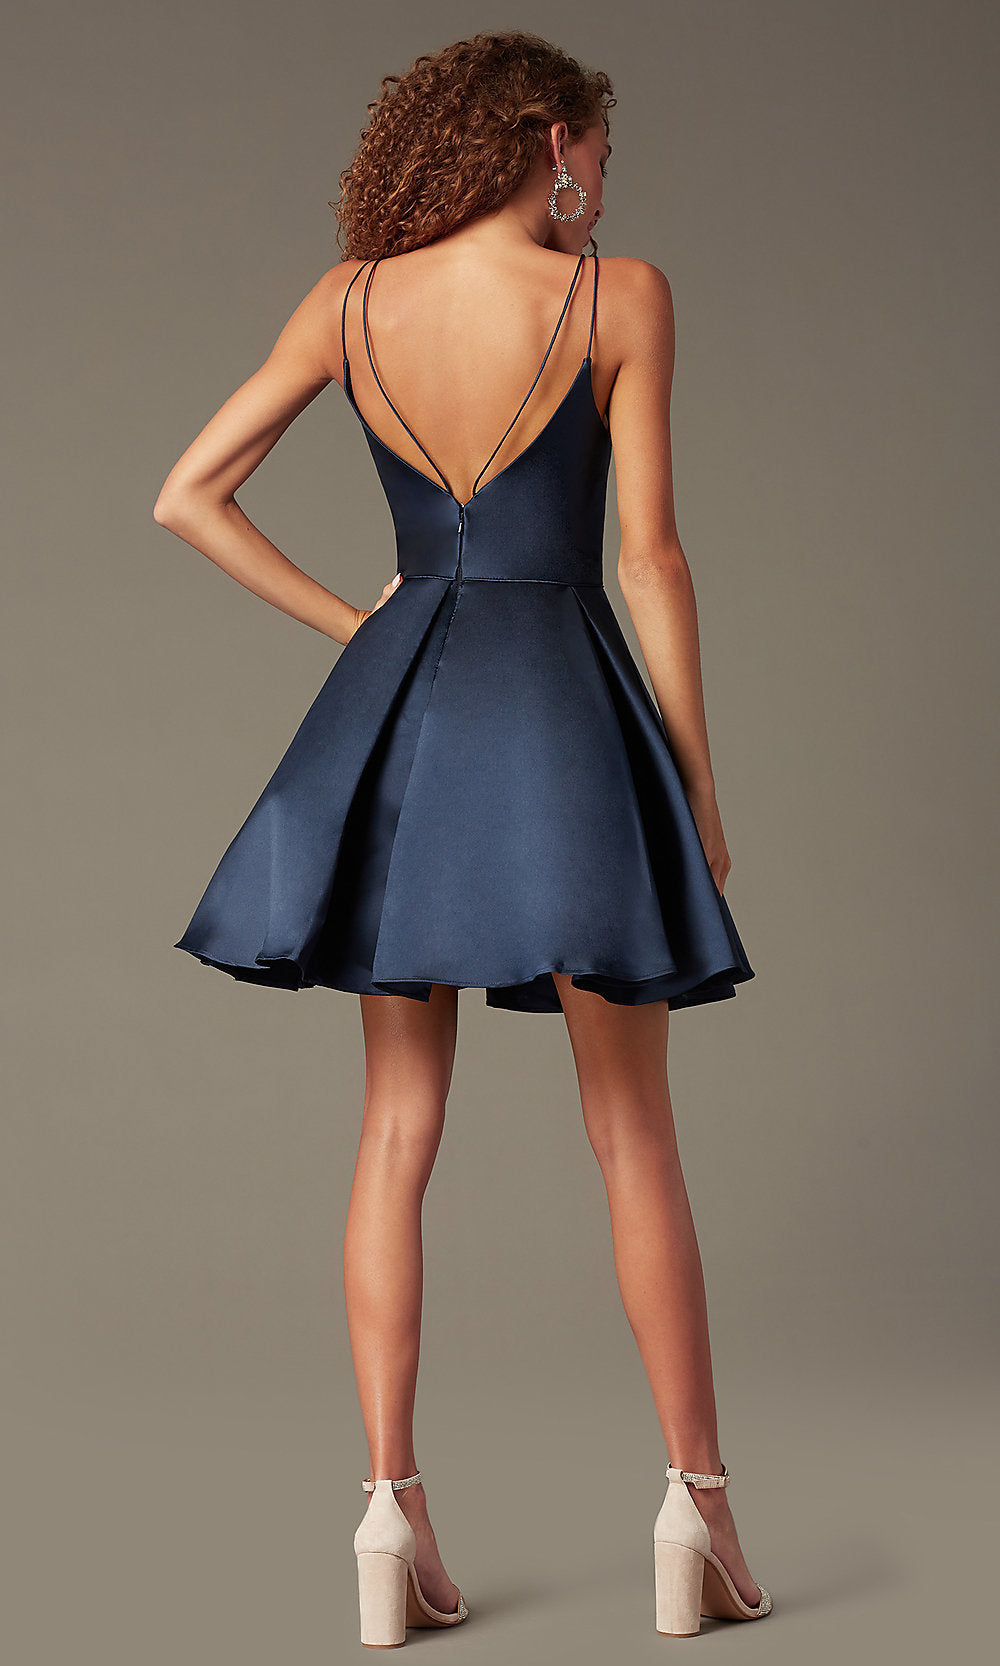  Semi-Formal A-Line Alyce Homecoming Dress in Satin